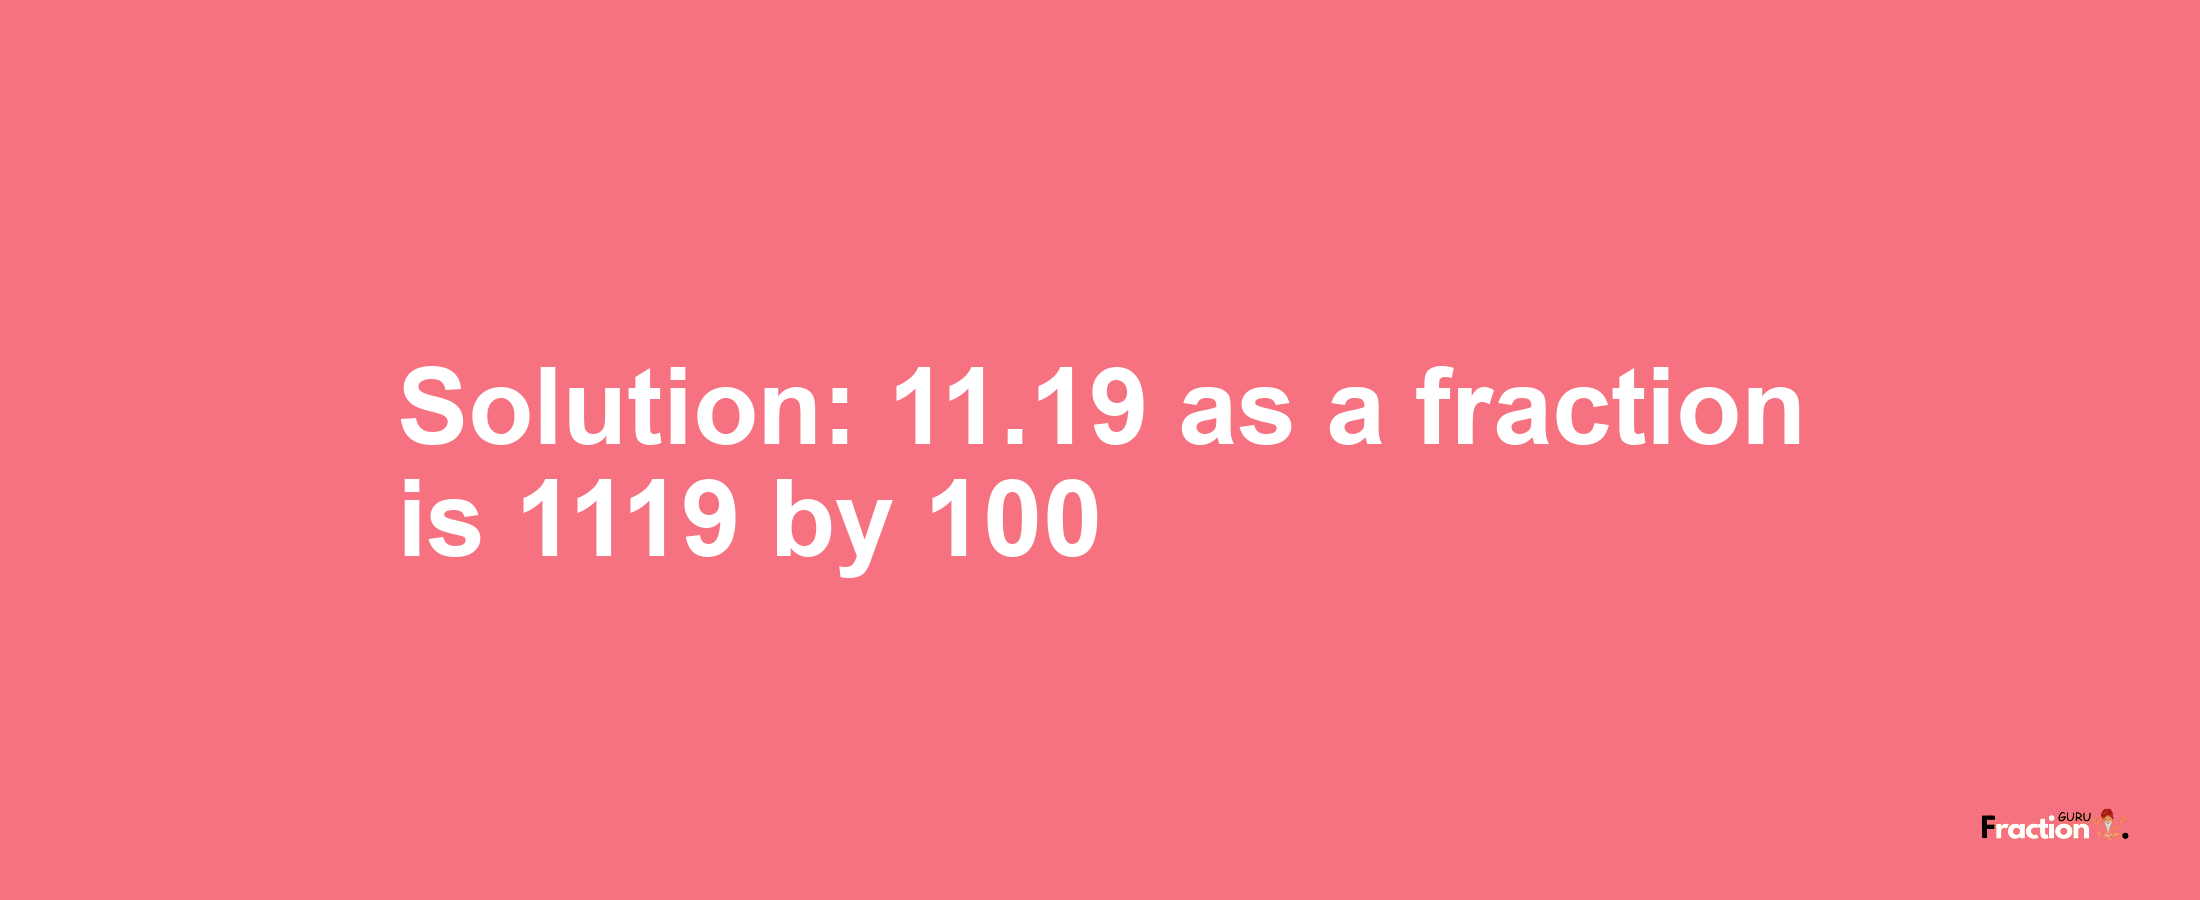 Solution:11.19 as a fraction is 1119/100